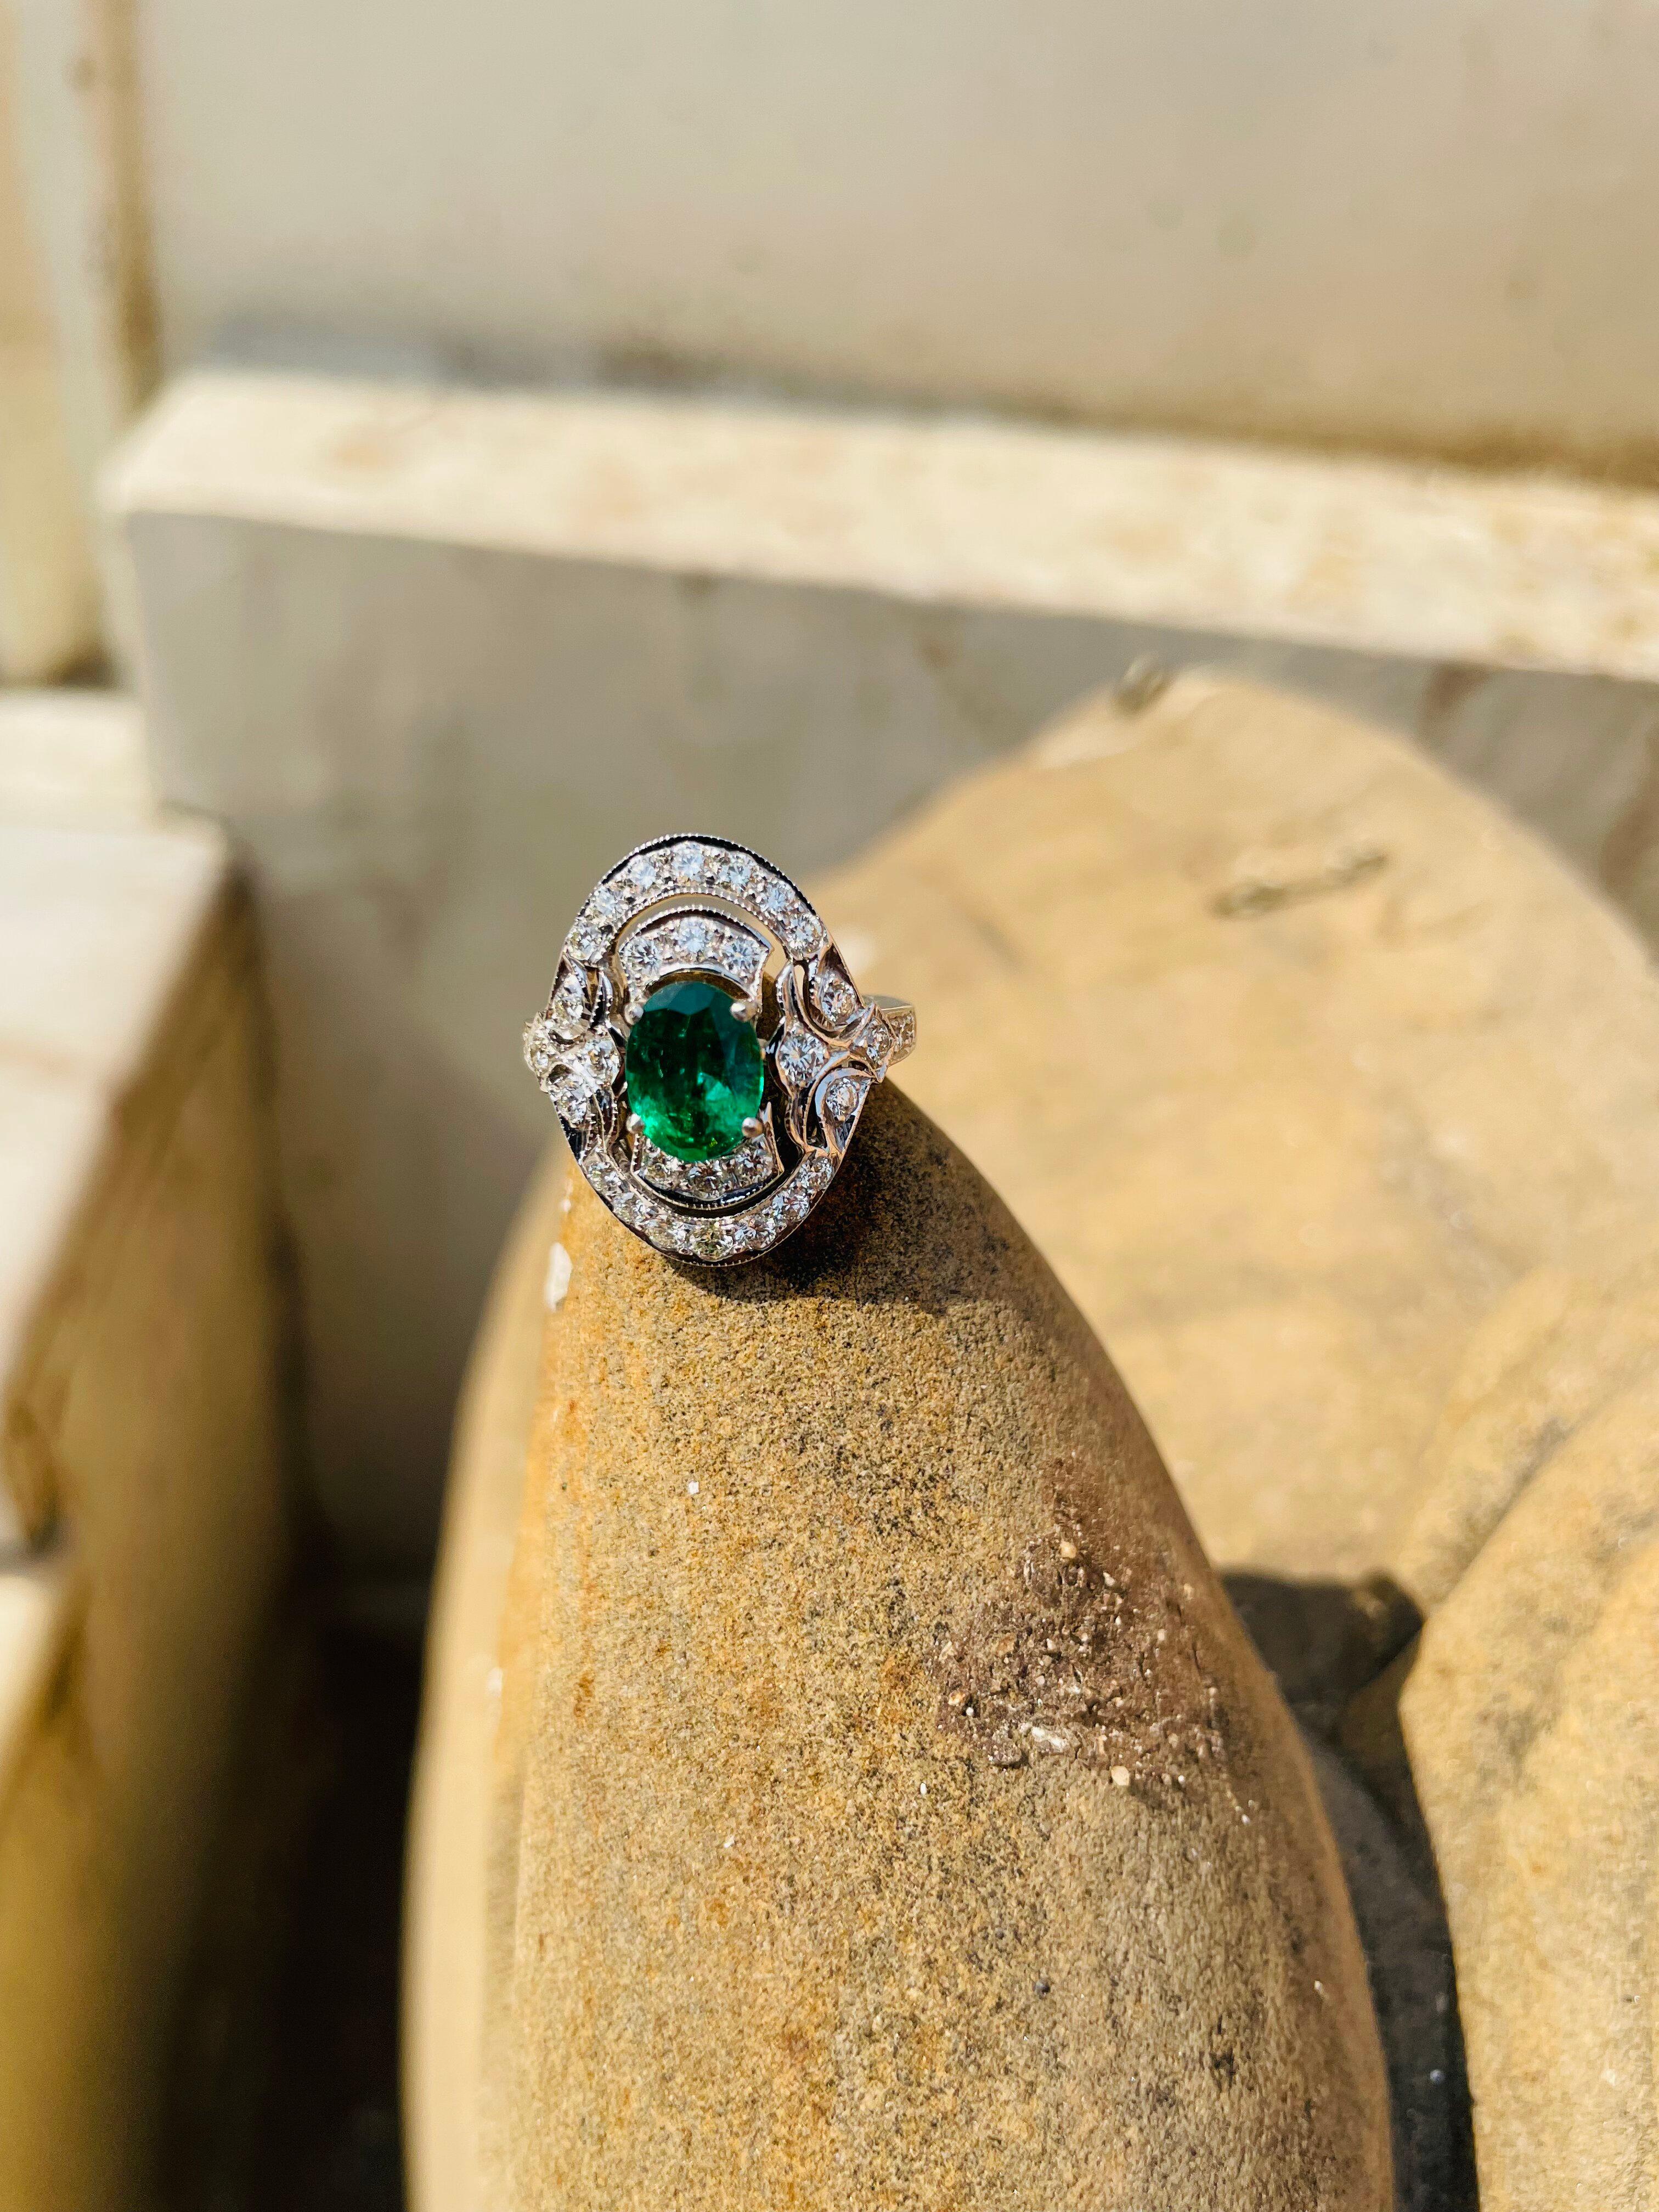 For Sale:  18kt Solid White Gold Art Deco Emerald Diamond Ring 4